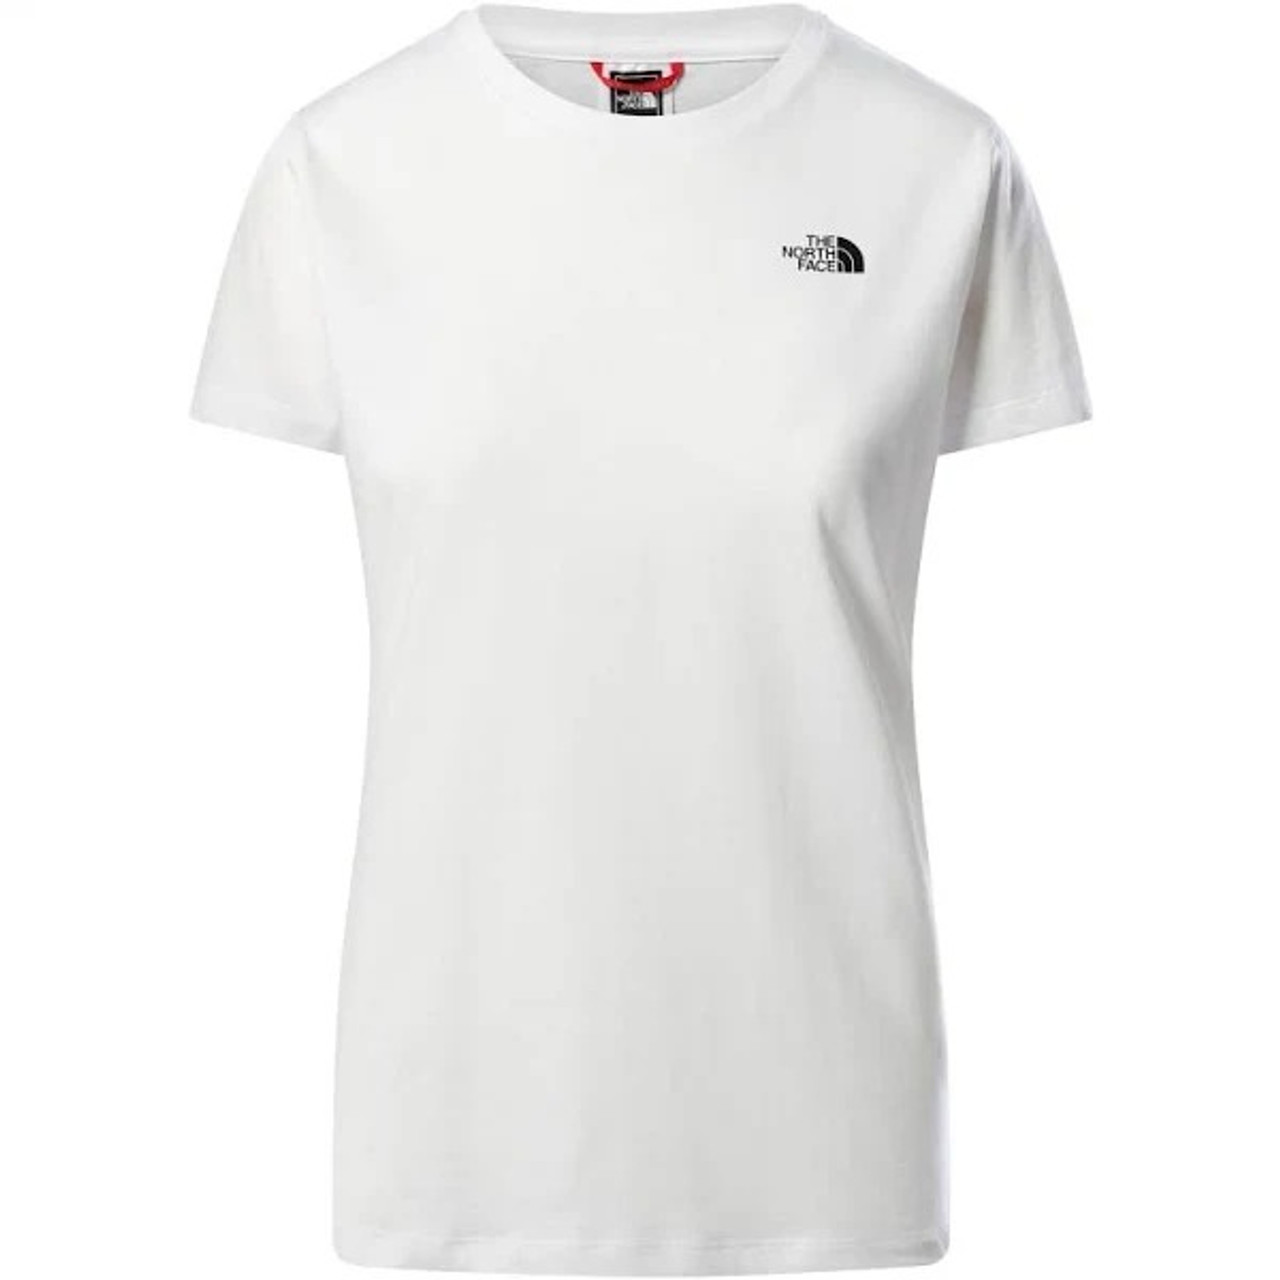 The North Face Logo in White Sleeve BTR - with BEYOND Short - RACK THE Chest T-shirt